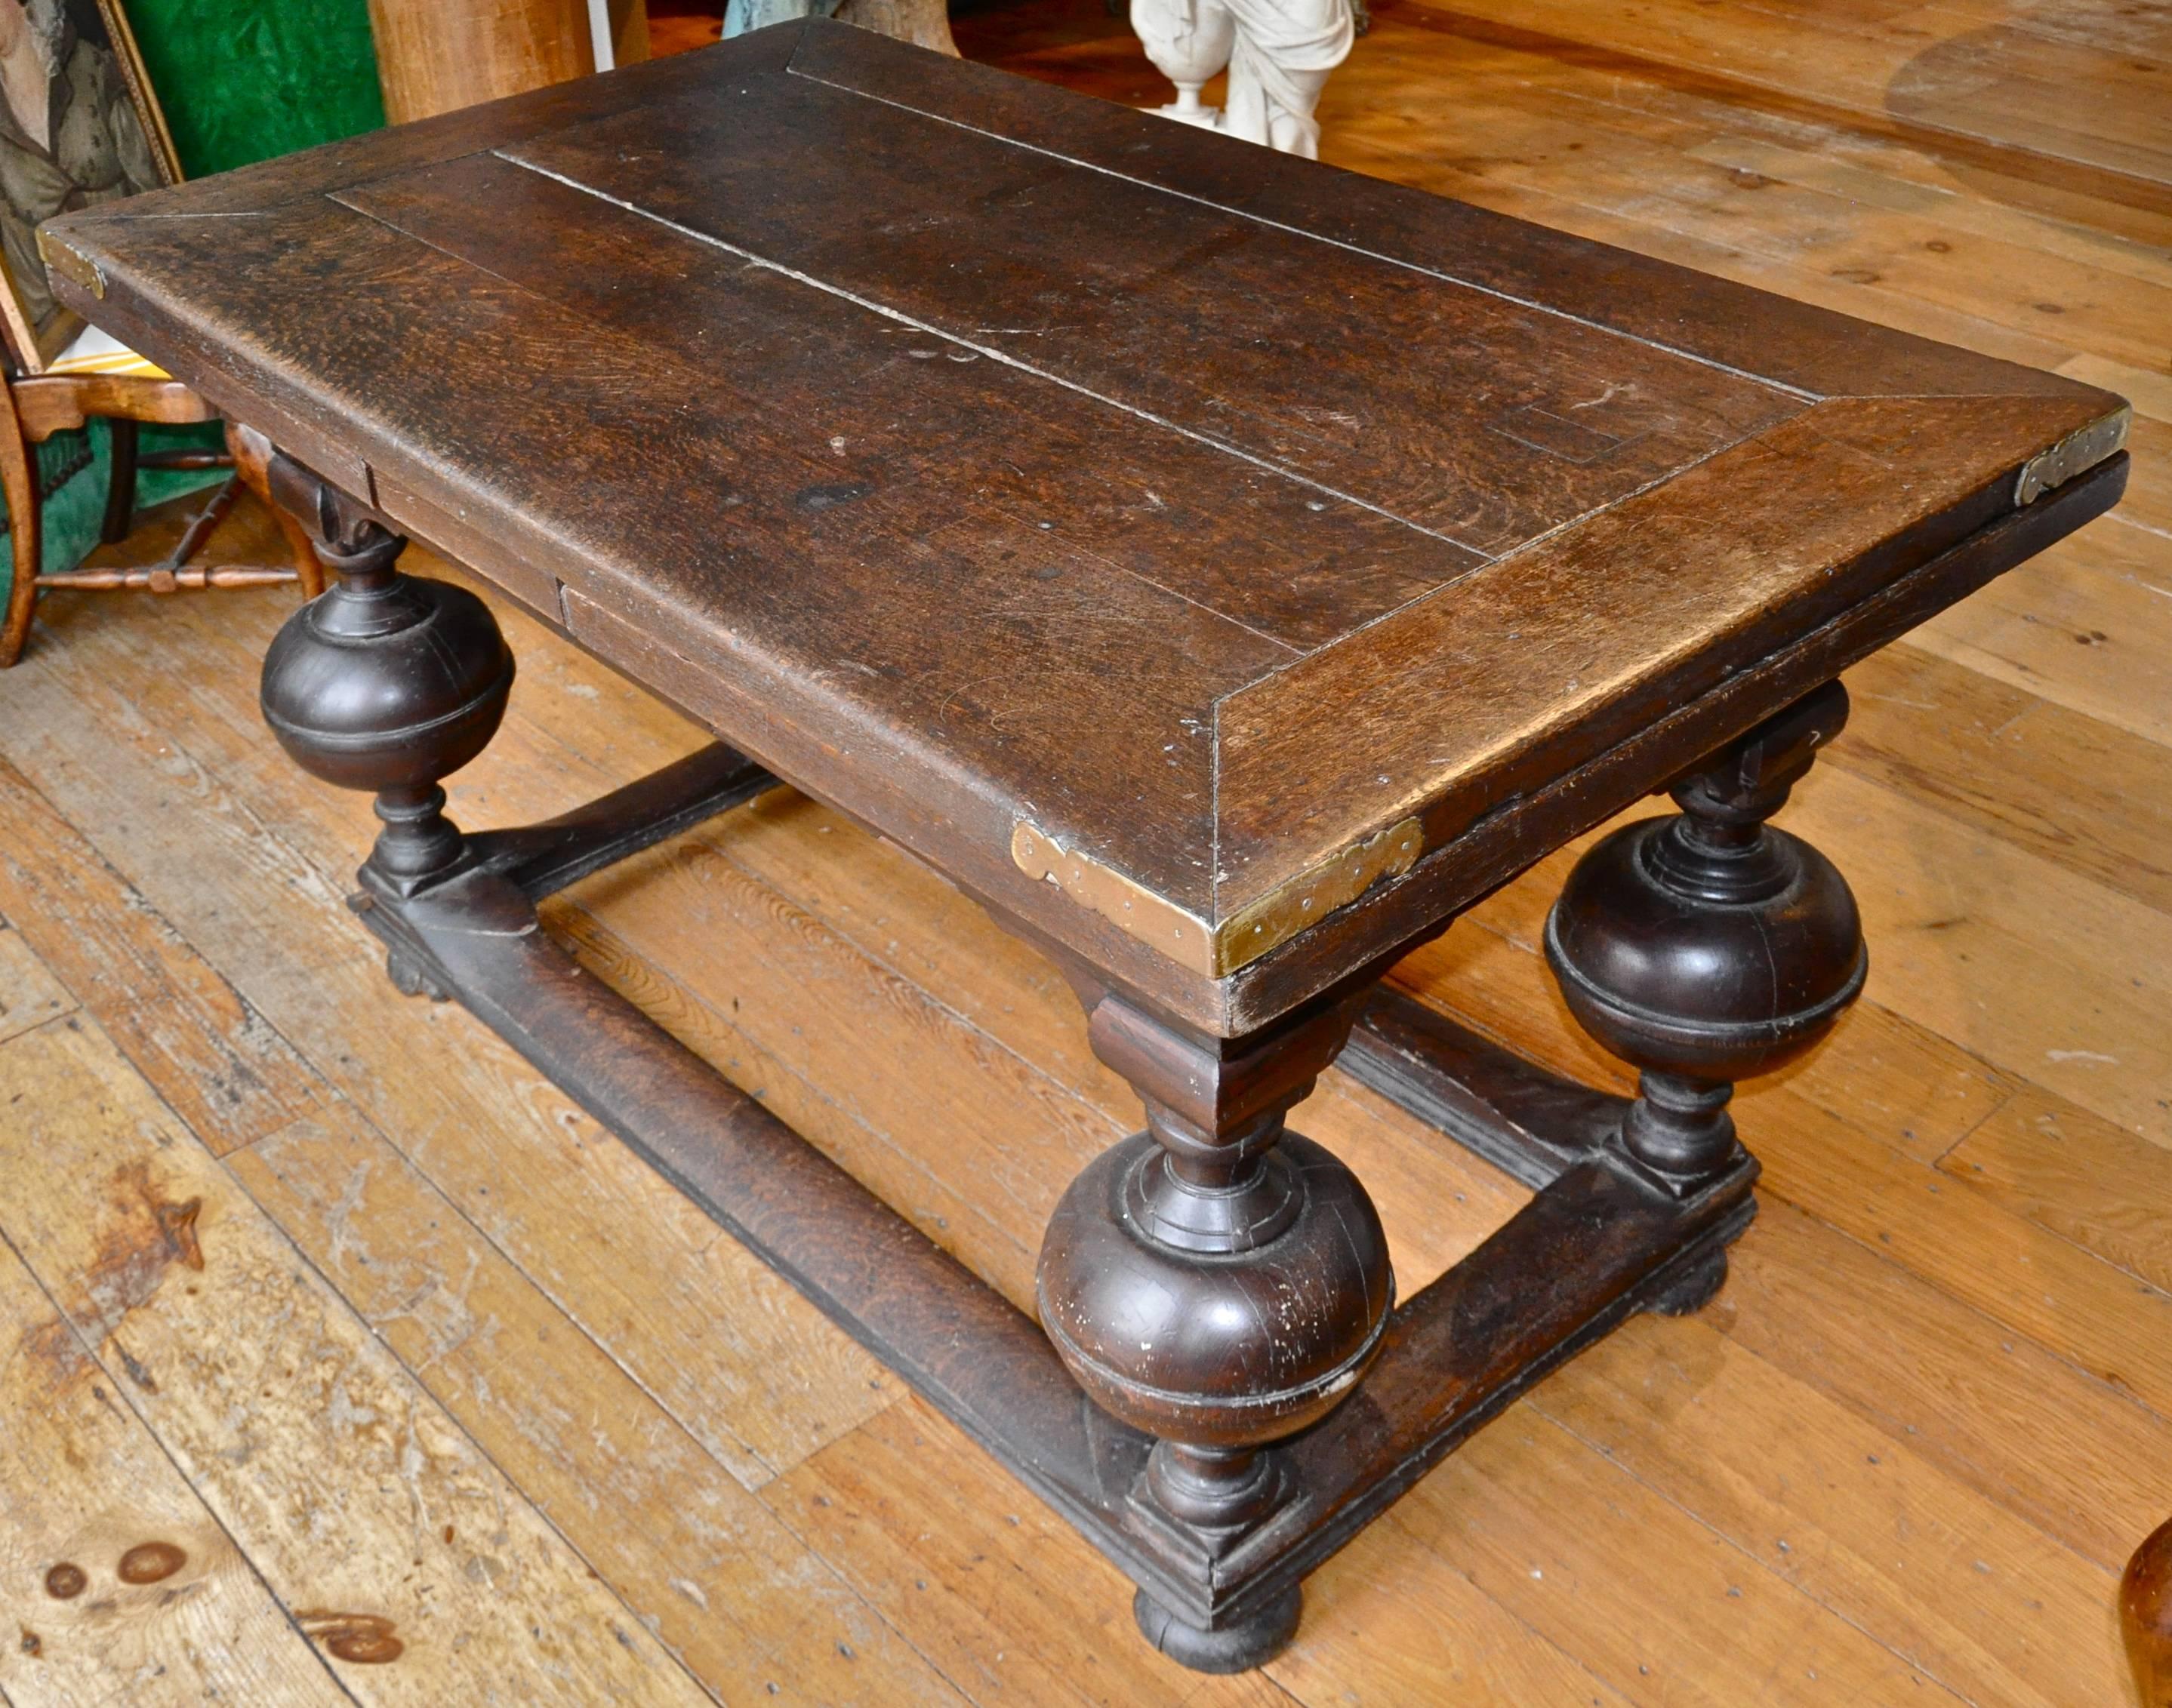 Period Dutch oak Baroque withdraw table.

Four amazingly robust turned ball legs holding original top.
Two leaves withdraw to extend table for dining.
All original.